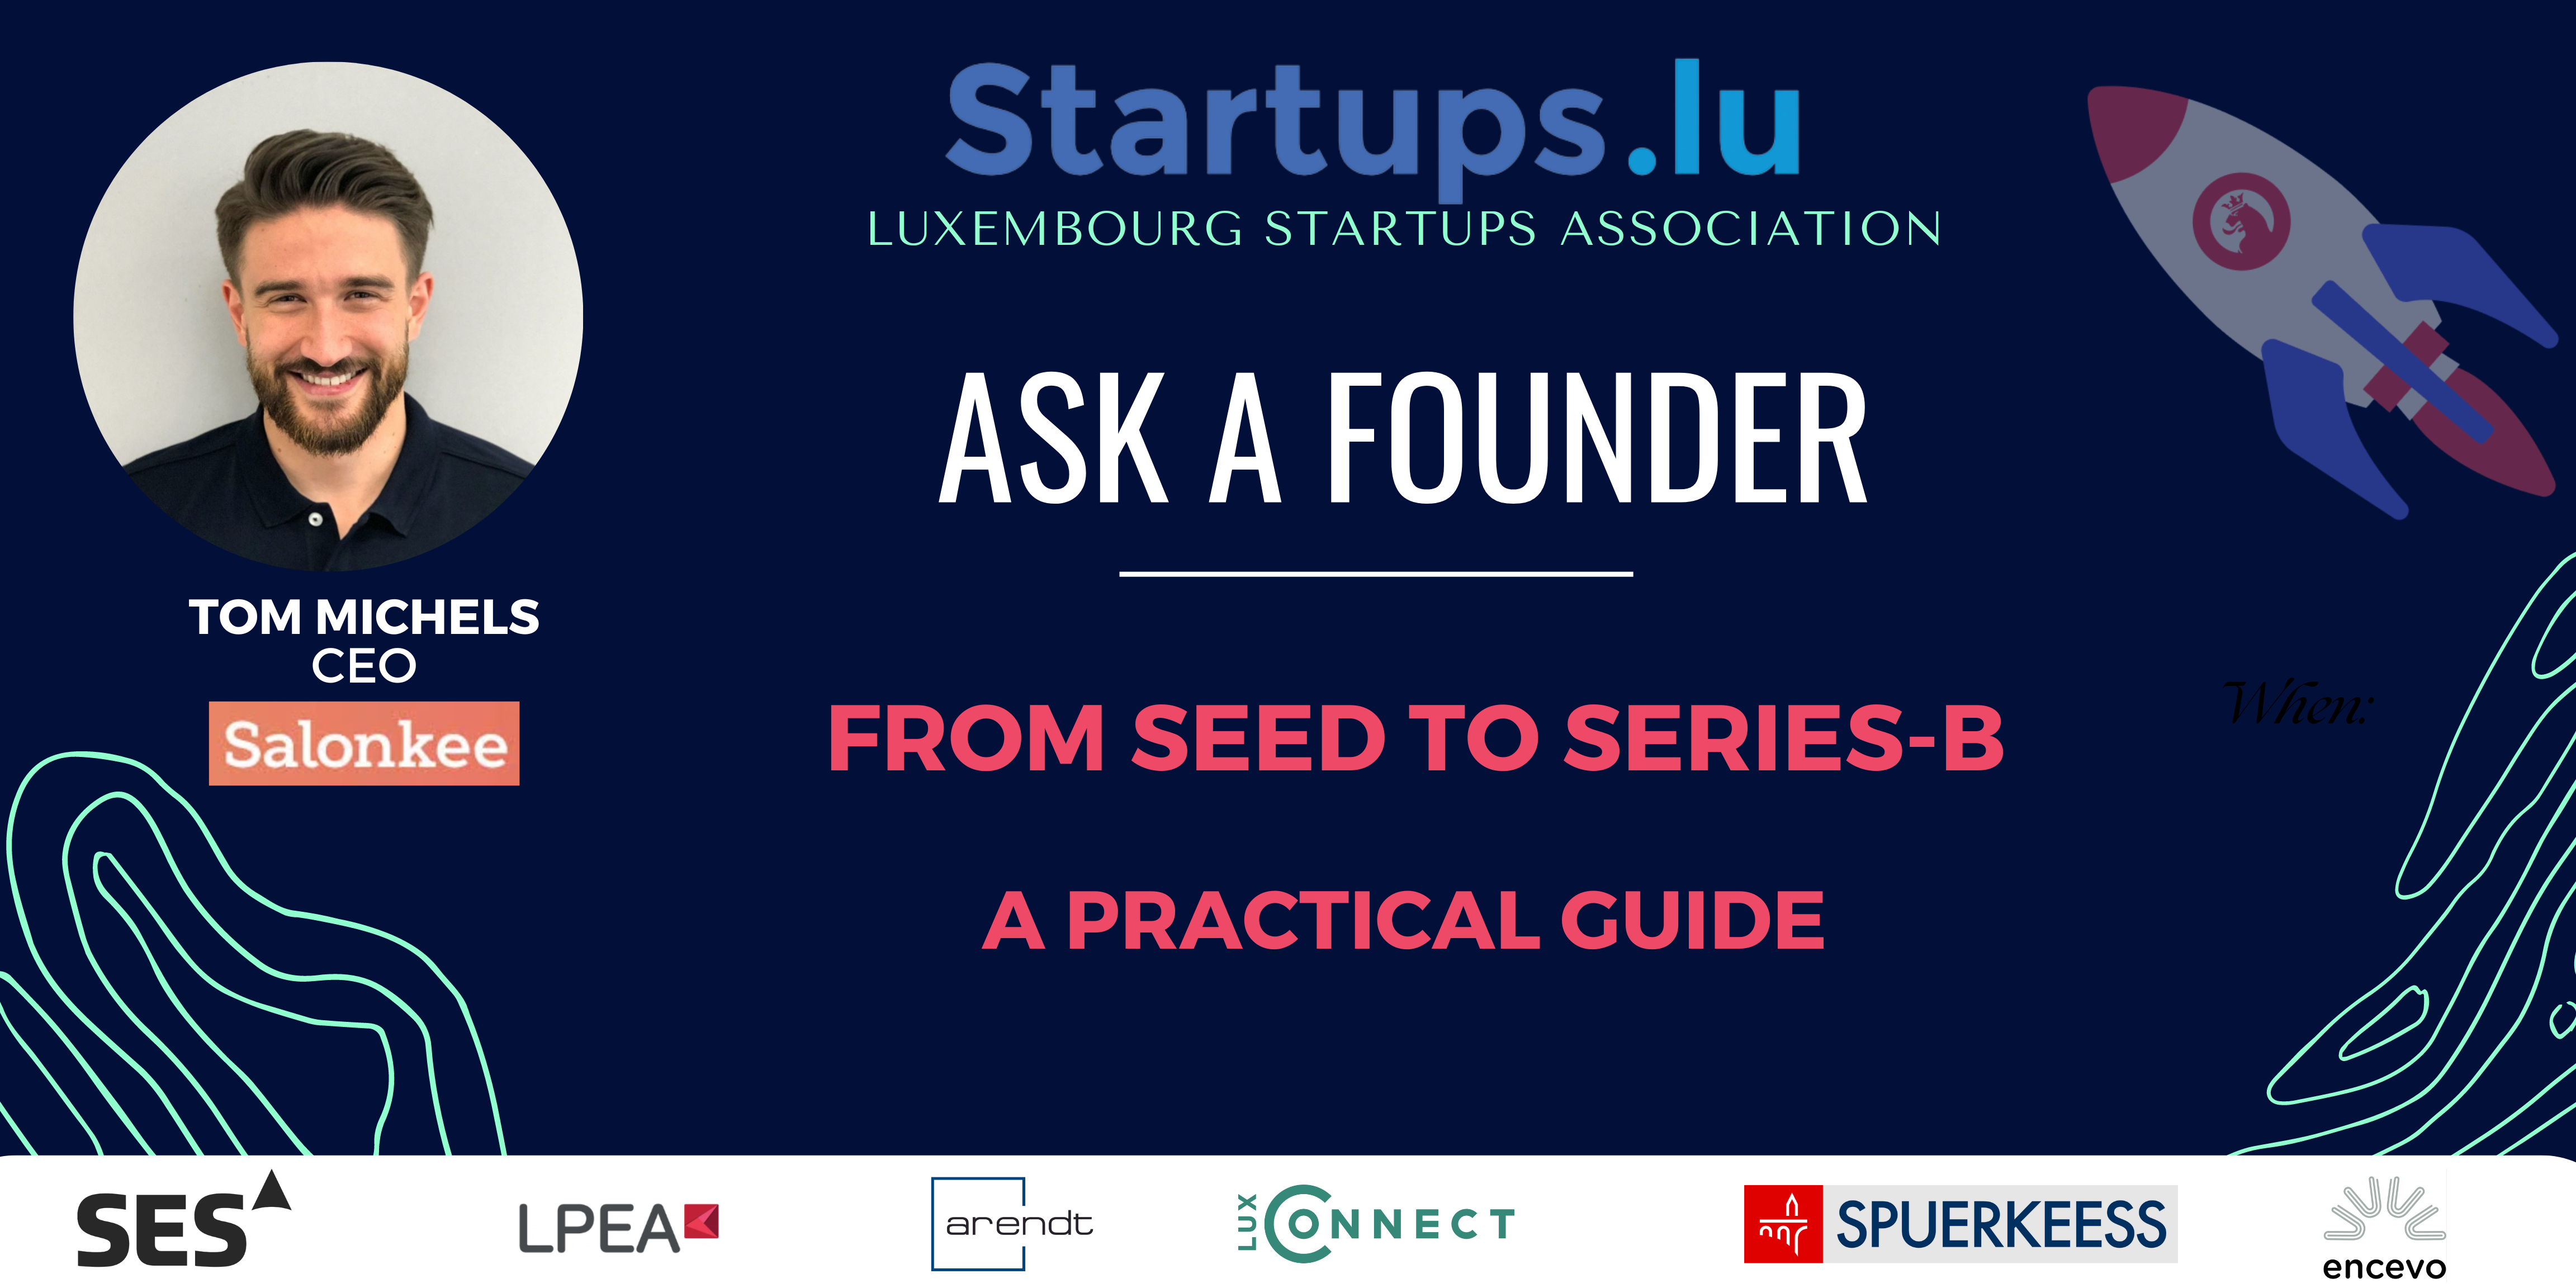 Ask a founder Tom Michels